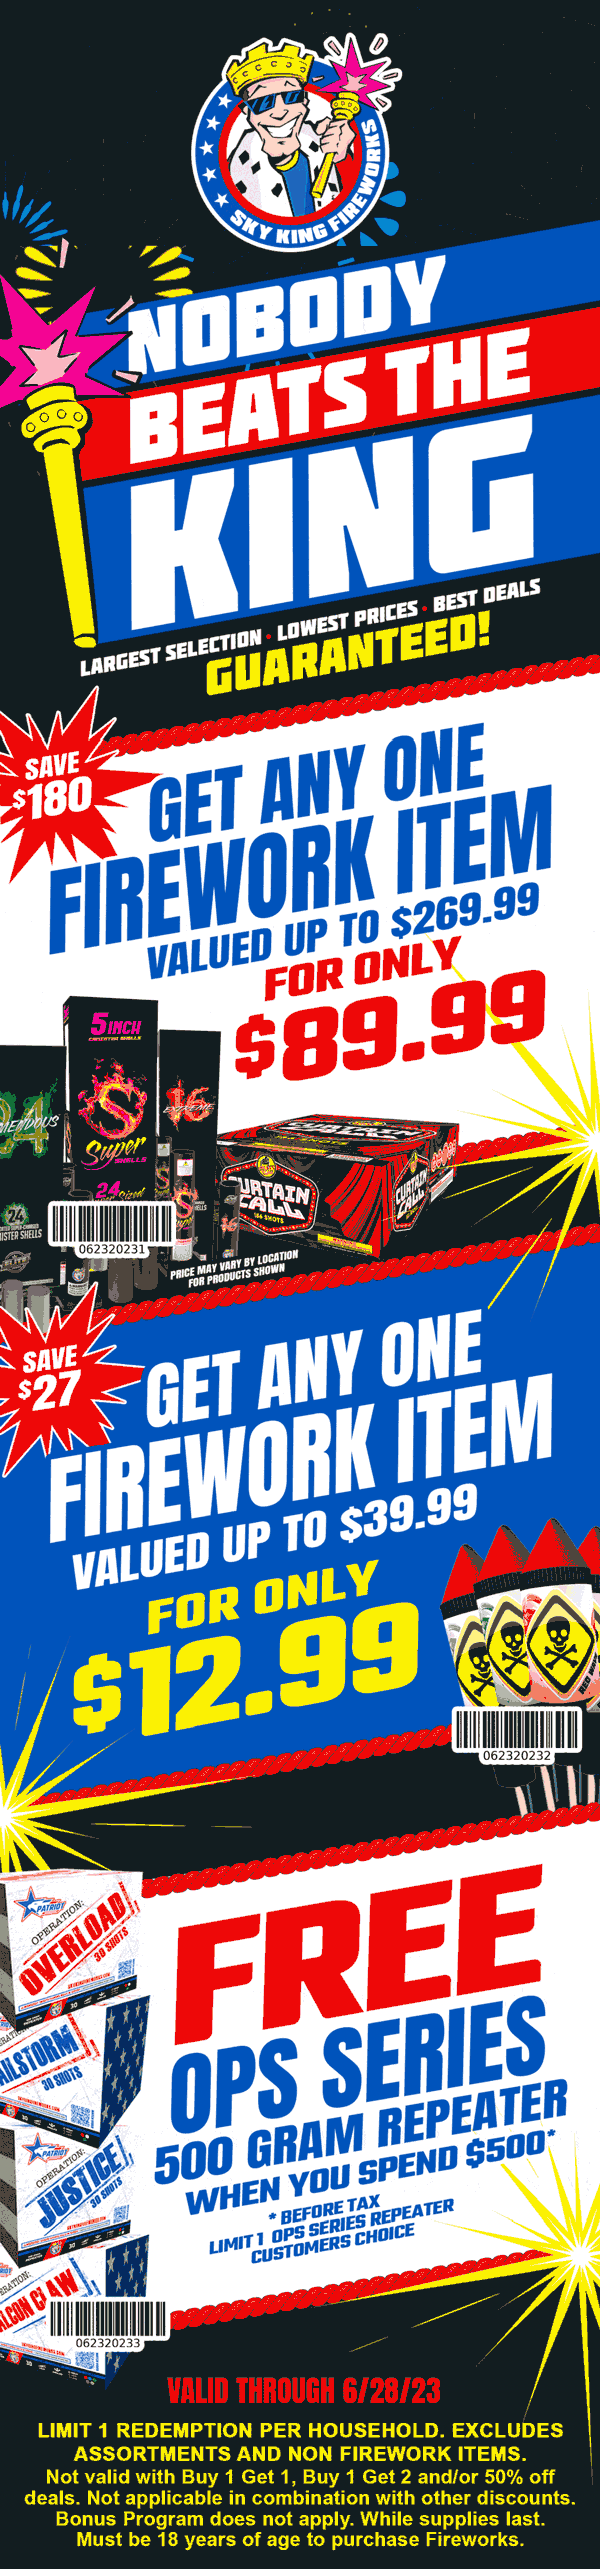 Sky King stores Coupon  $40 firework item for $13 & more at Sky King #skyking 